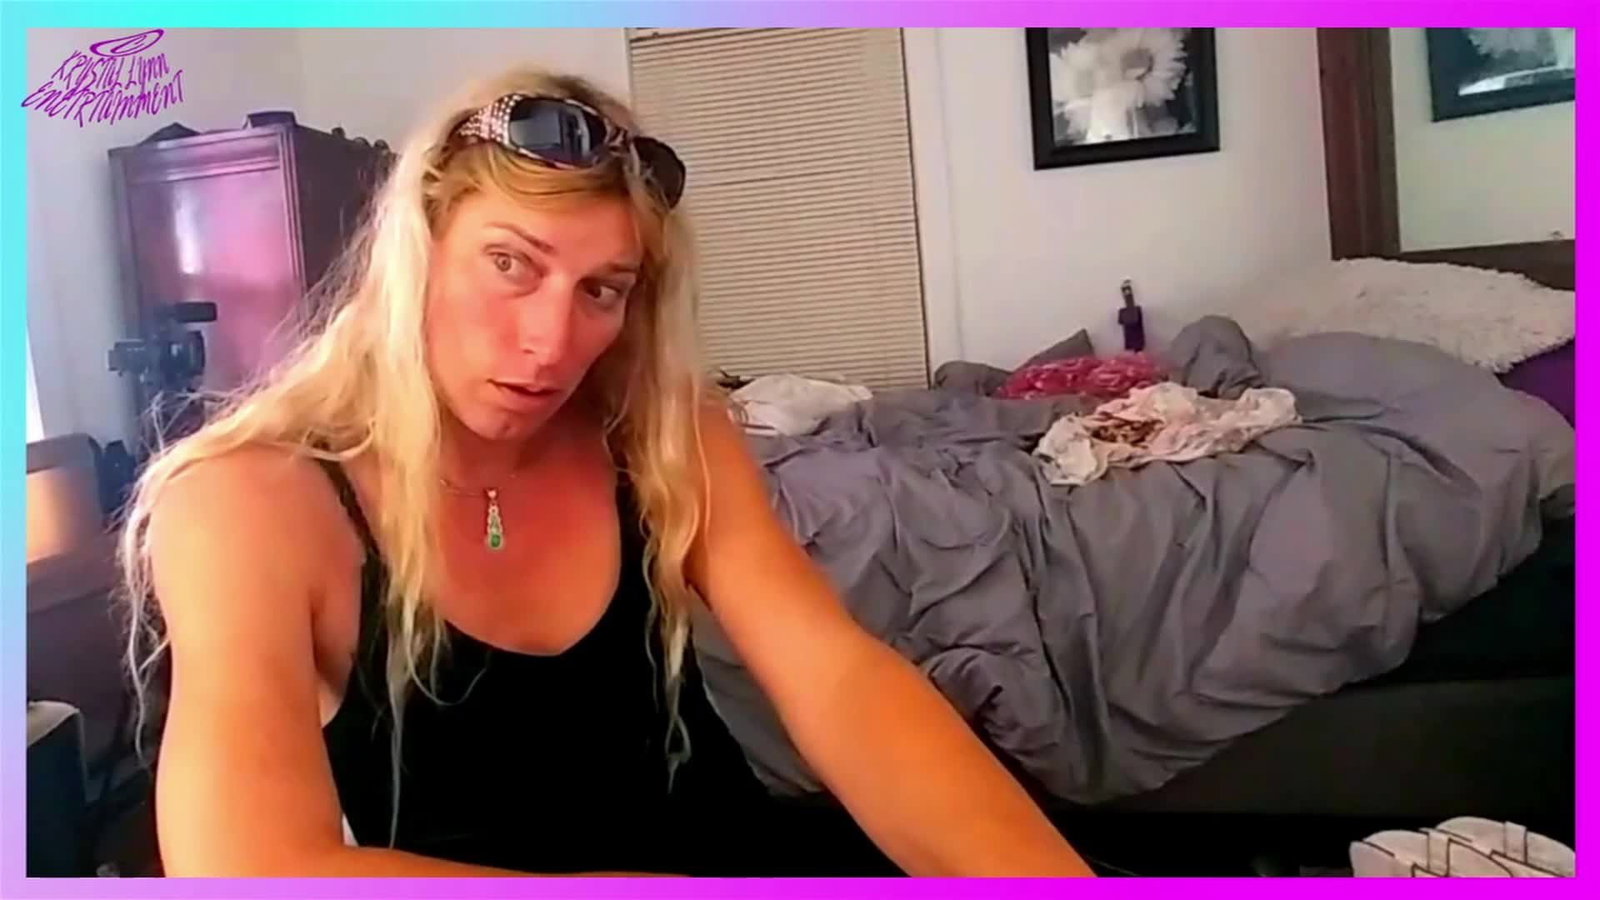 Watch the Video by Trans Girl with the username @KrystalLynn, who is a star user, posted on October 1, 2021. The post is about the topic Trans. and the text says 'I might be to sexy for you'